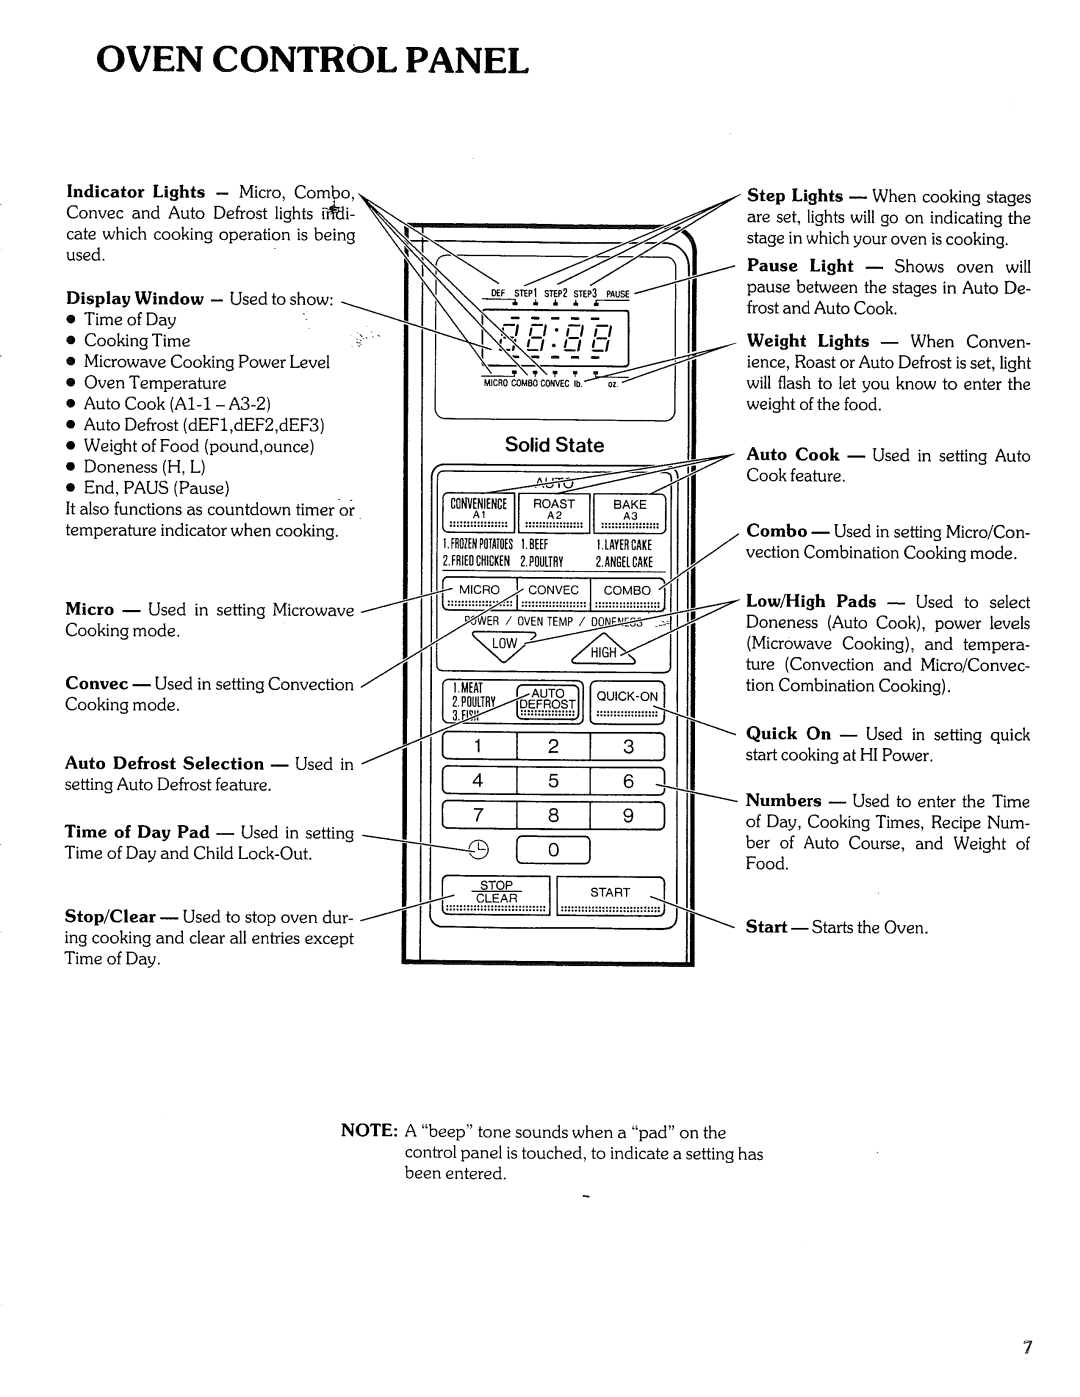 Sears Microwave Oven manual Oven Control Panel, Indicator, Lights, Solid State, 8.L--/L-q 